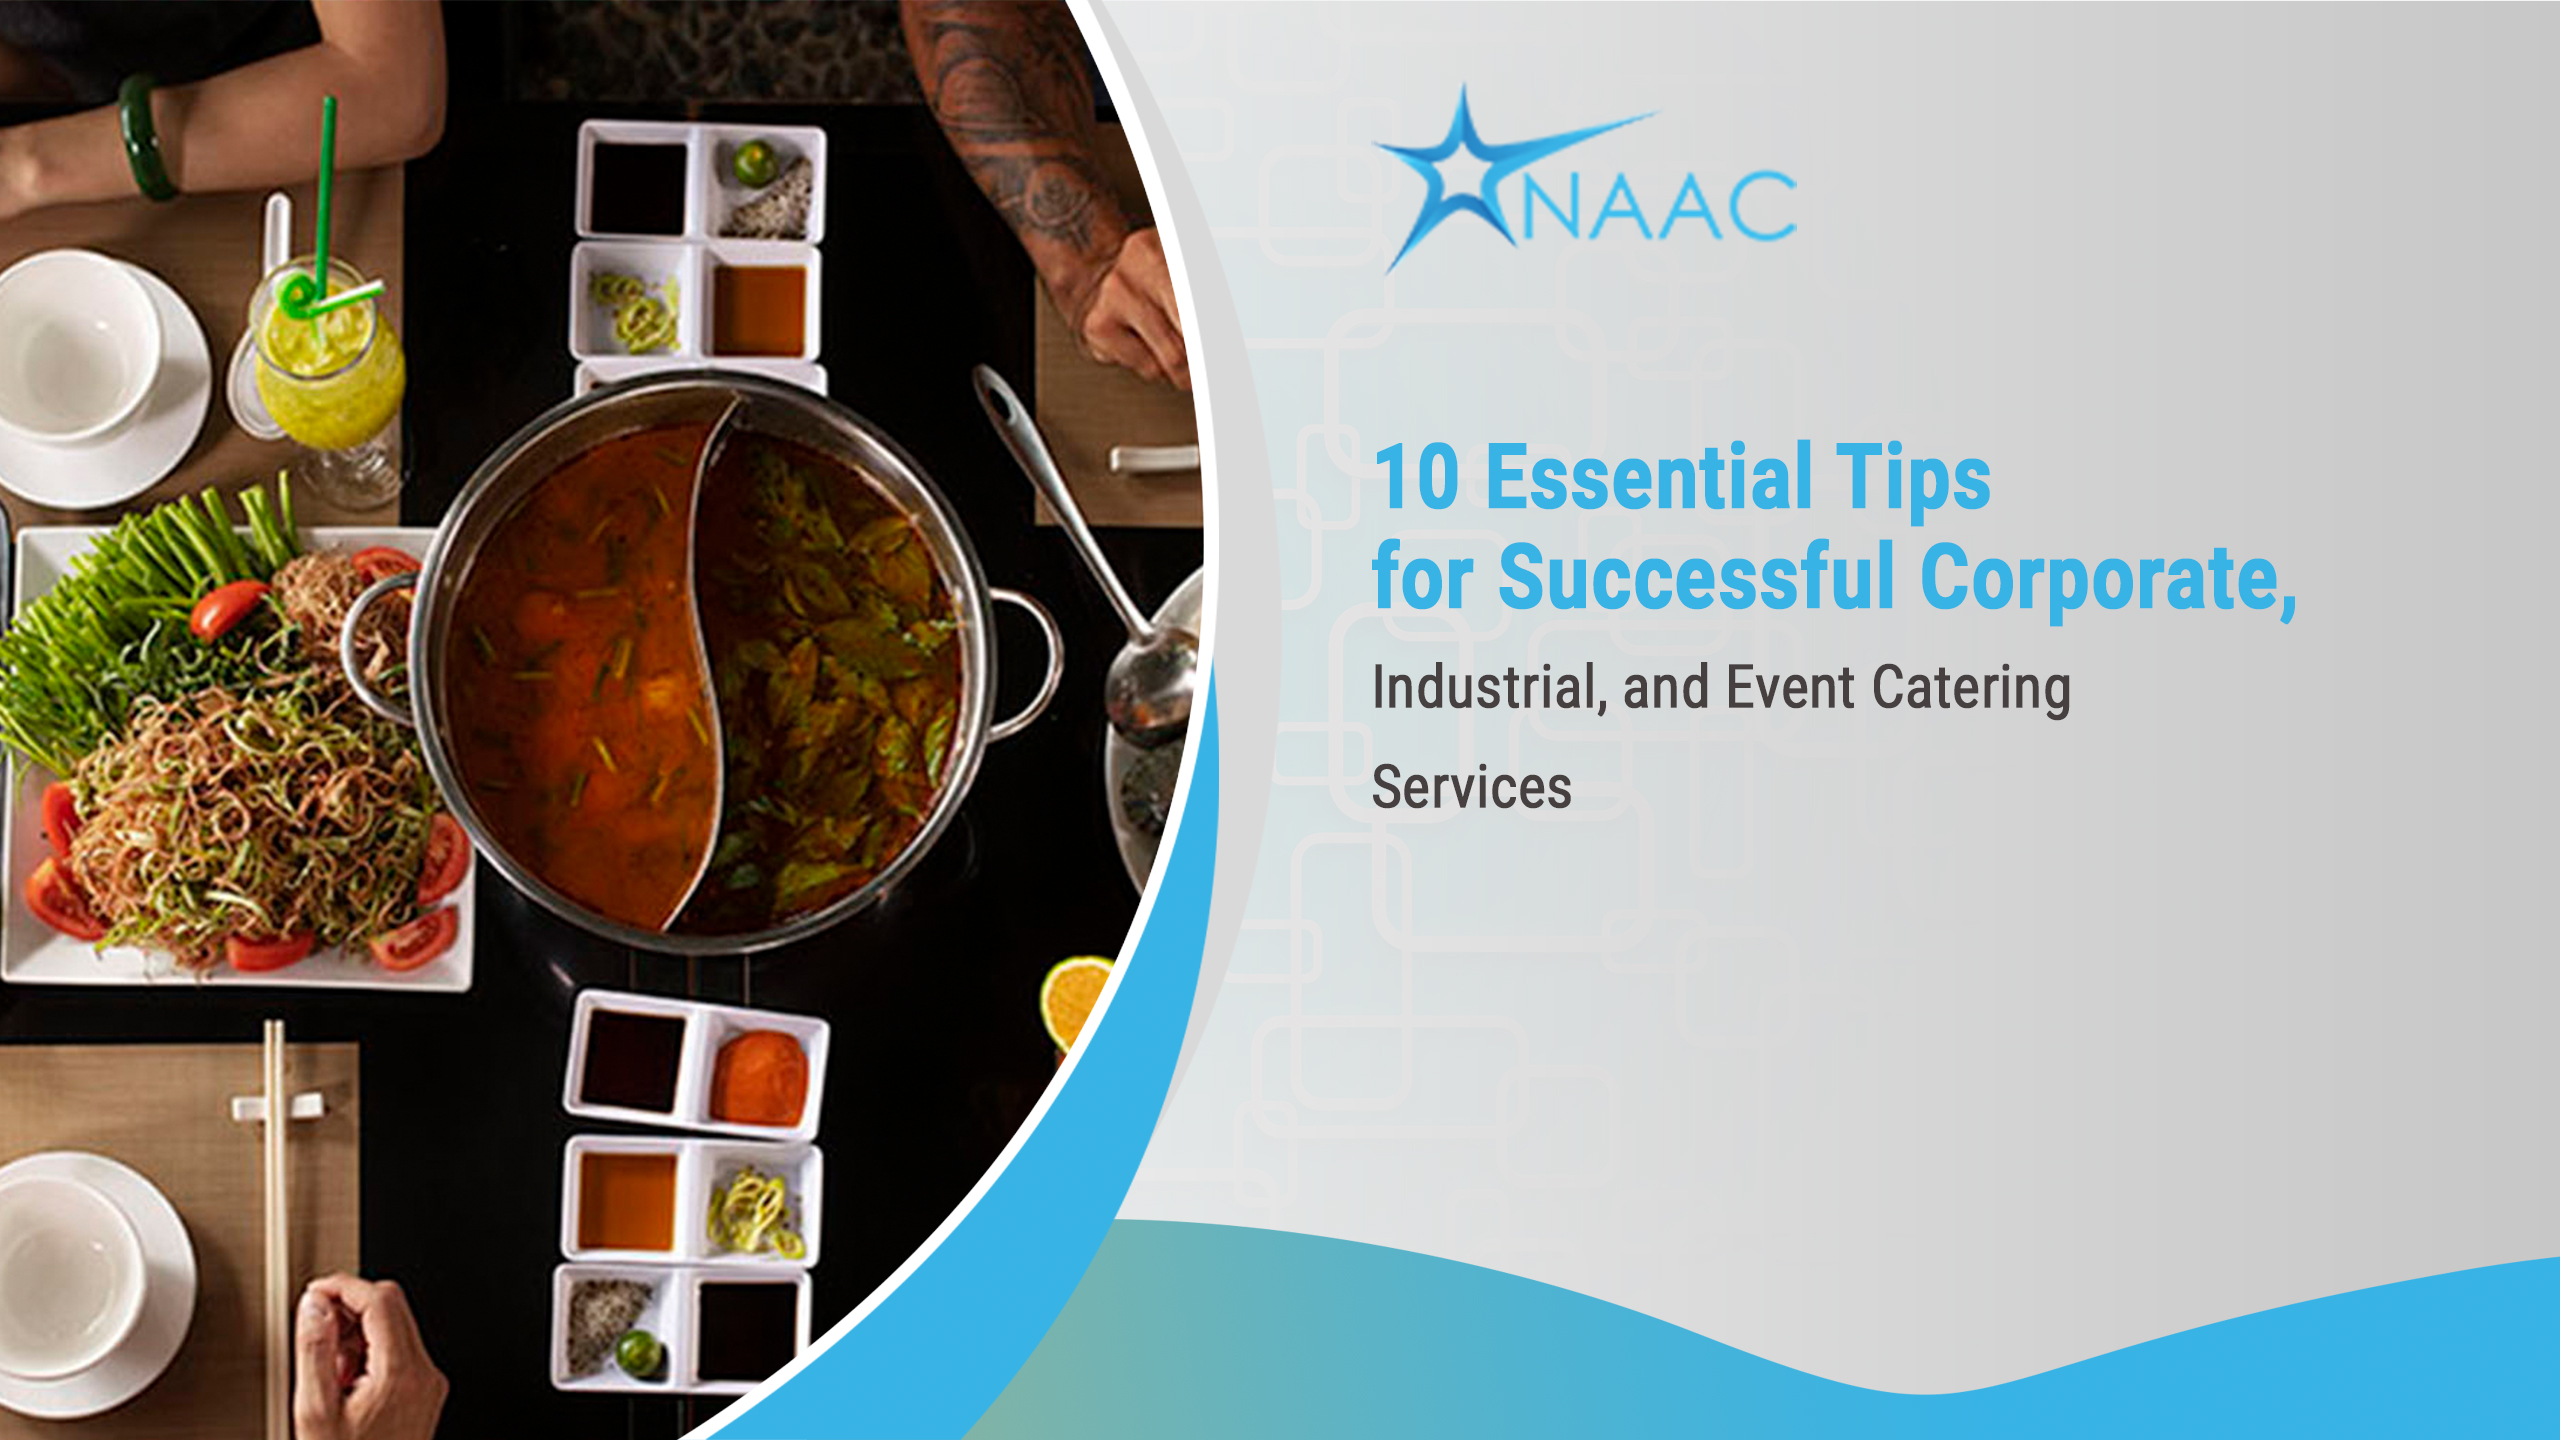 10 Essential Tips for Successful Corporate, Industrial, and Event Catering Services